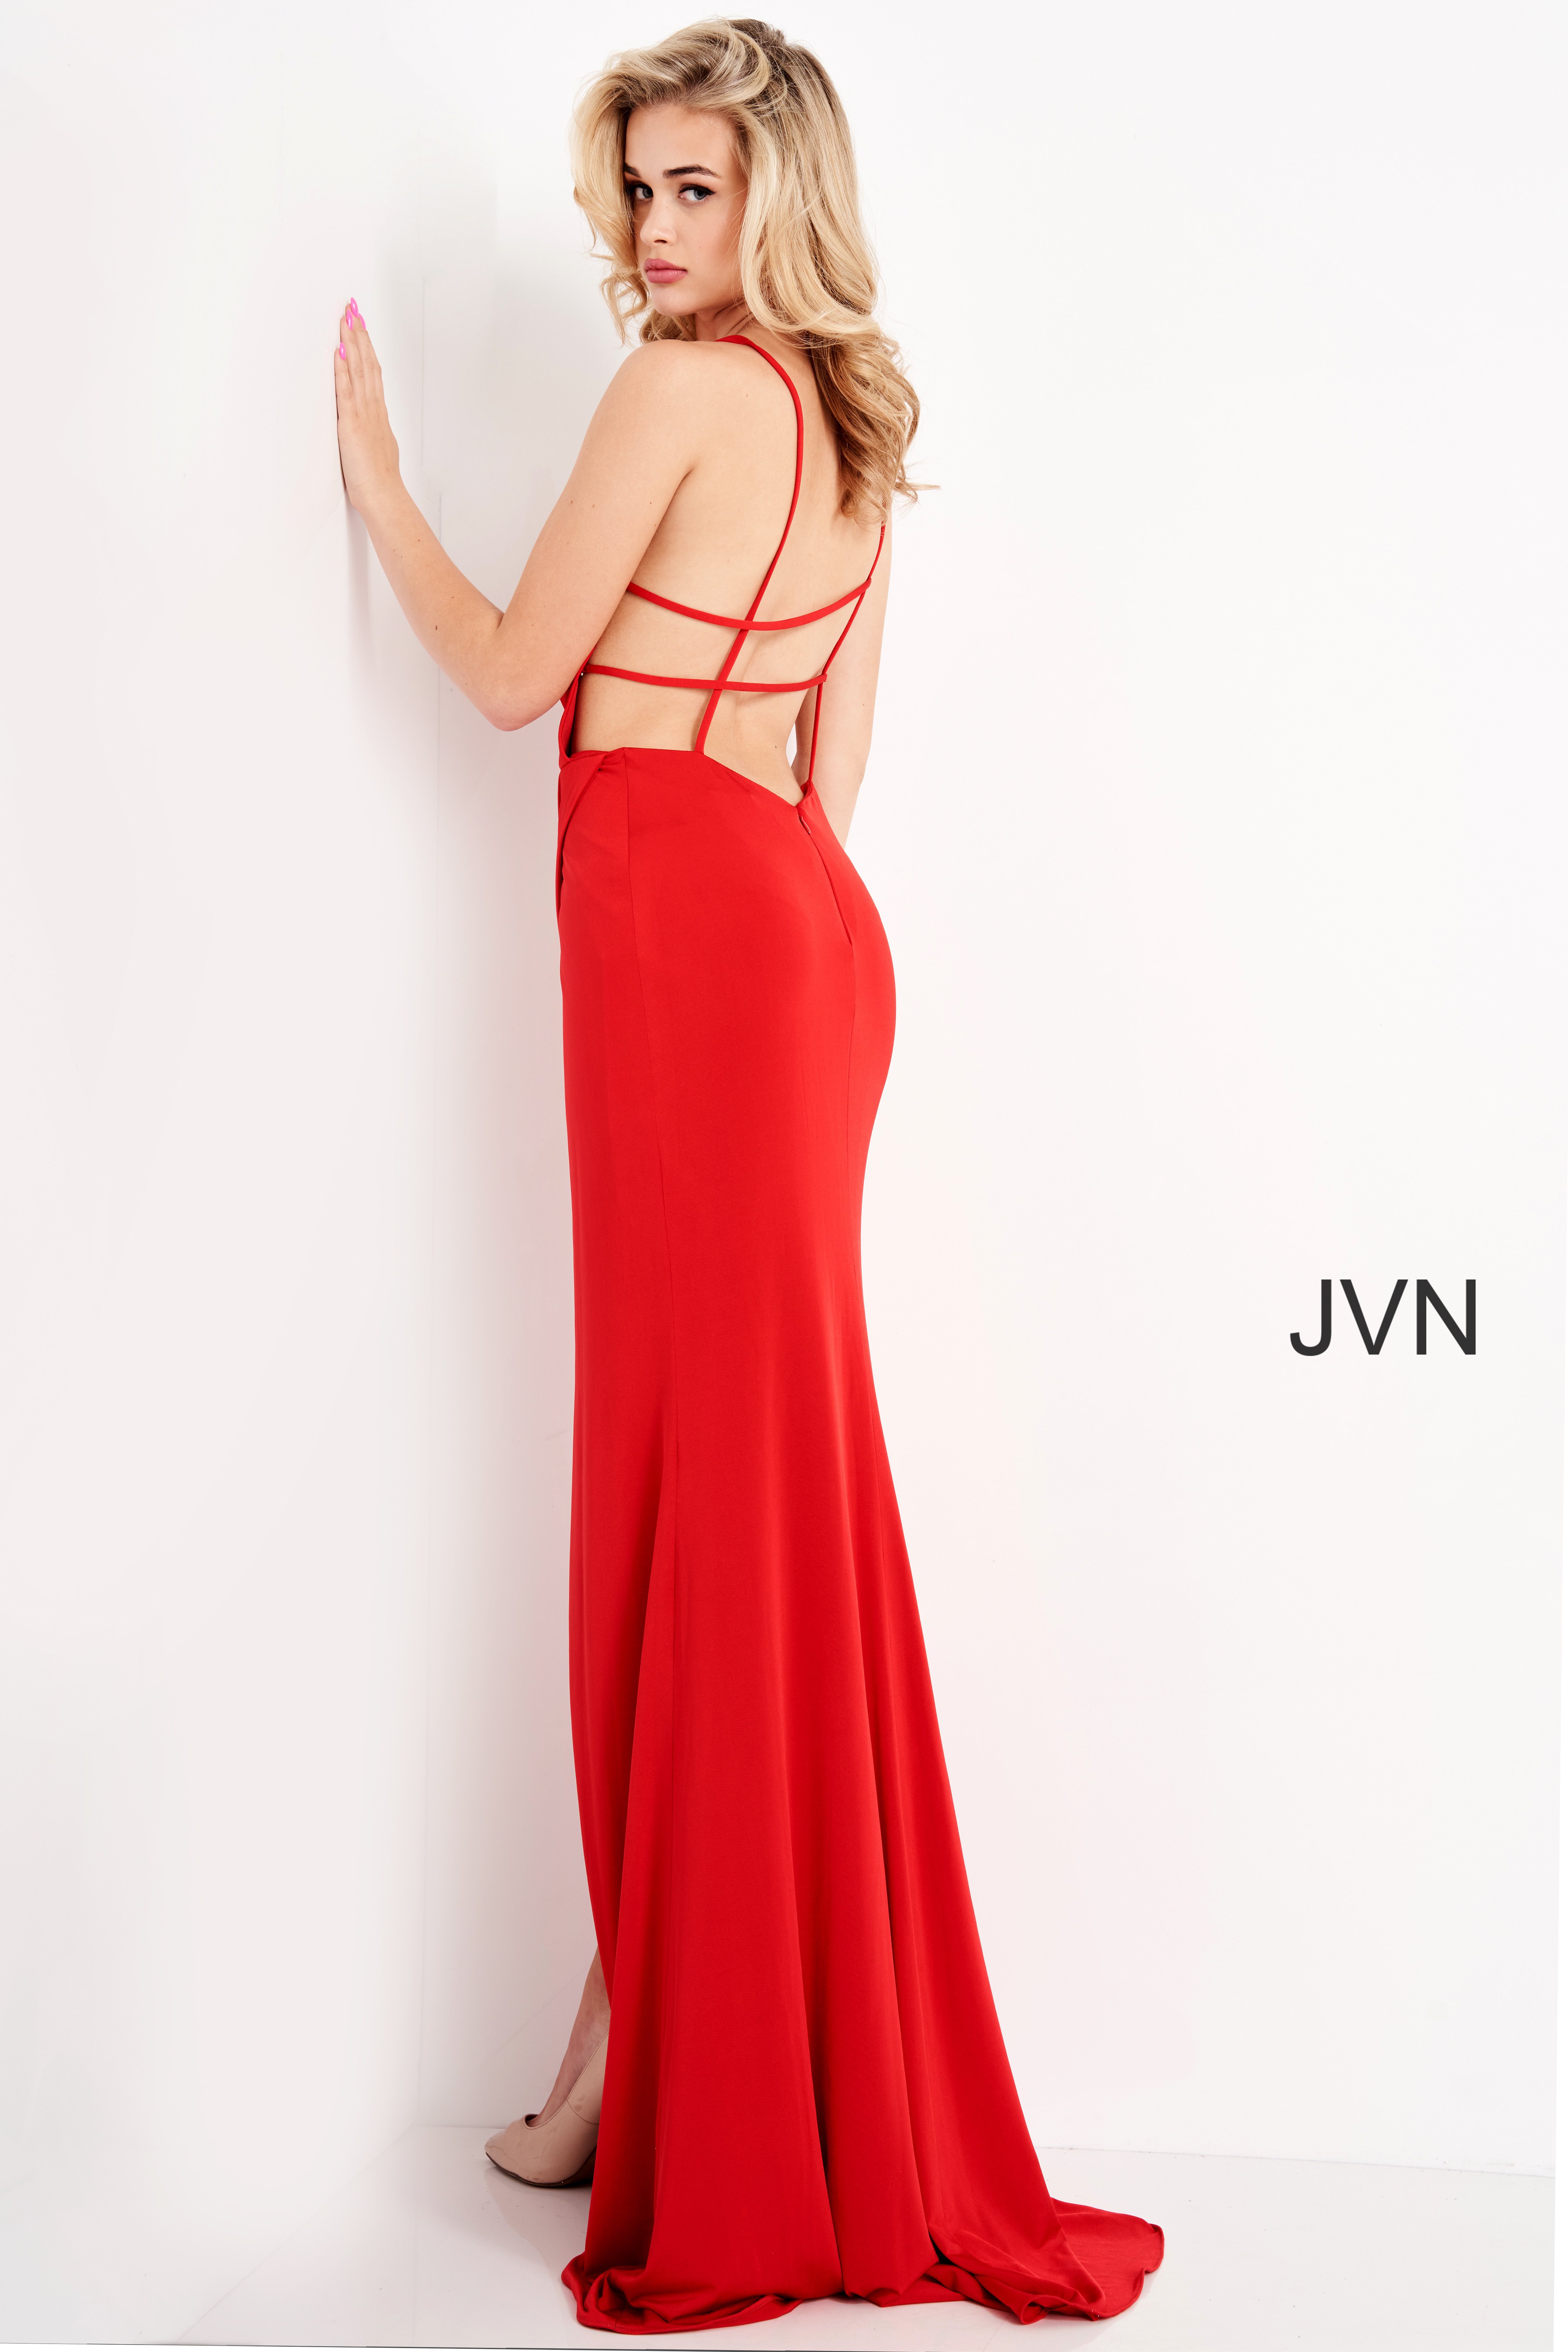 Jvn Red Backless Sexy Long Prom Dress